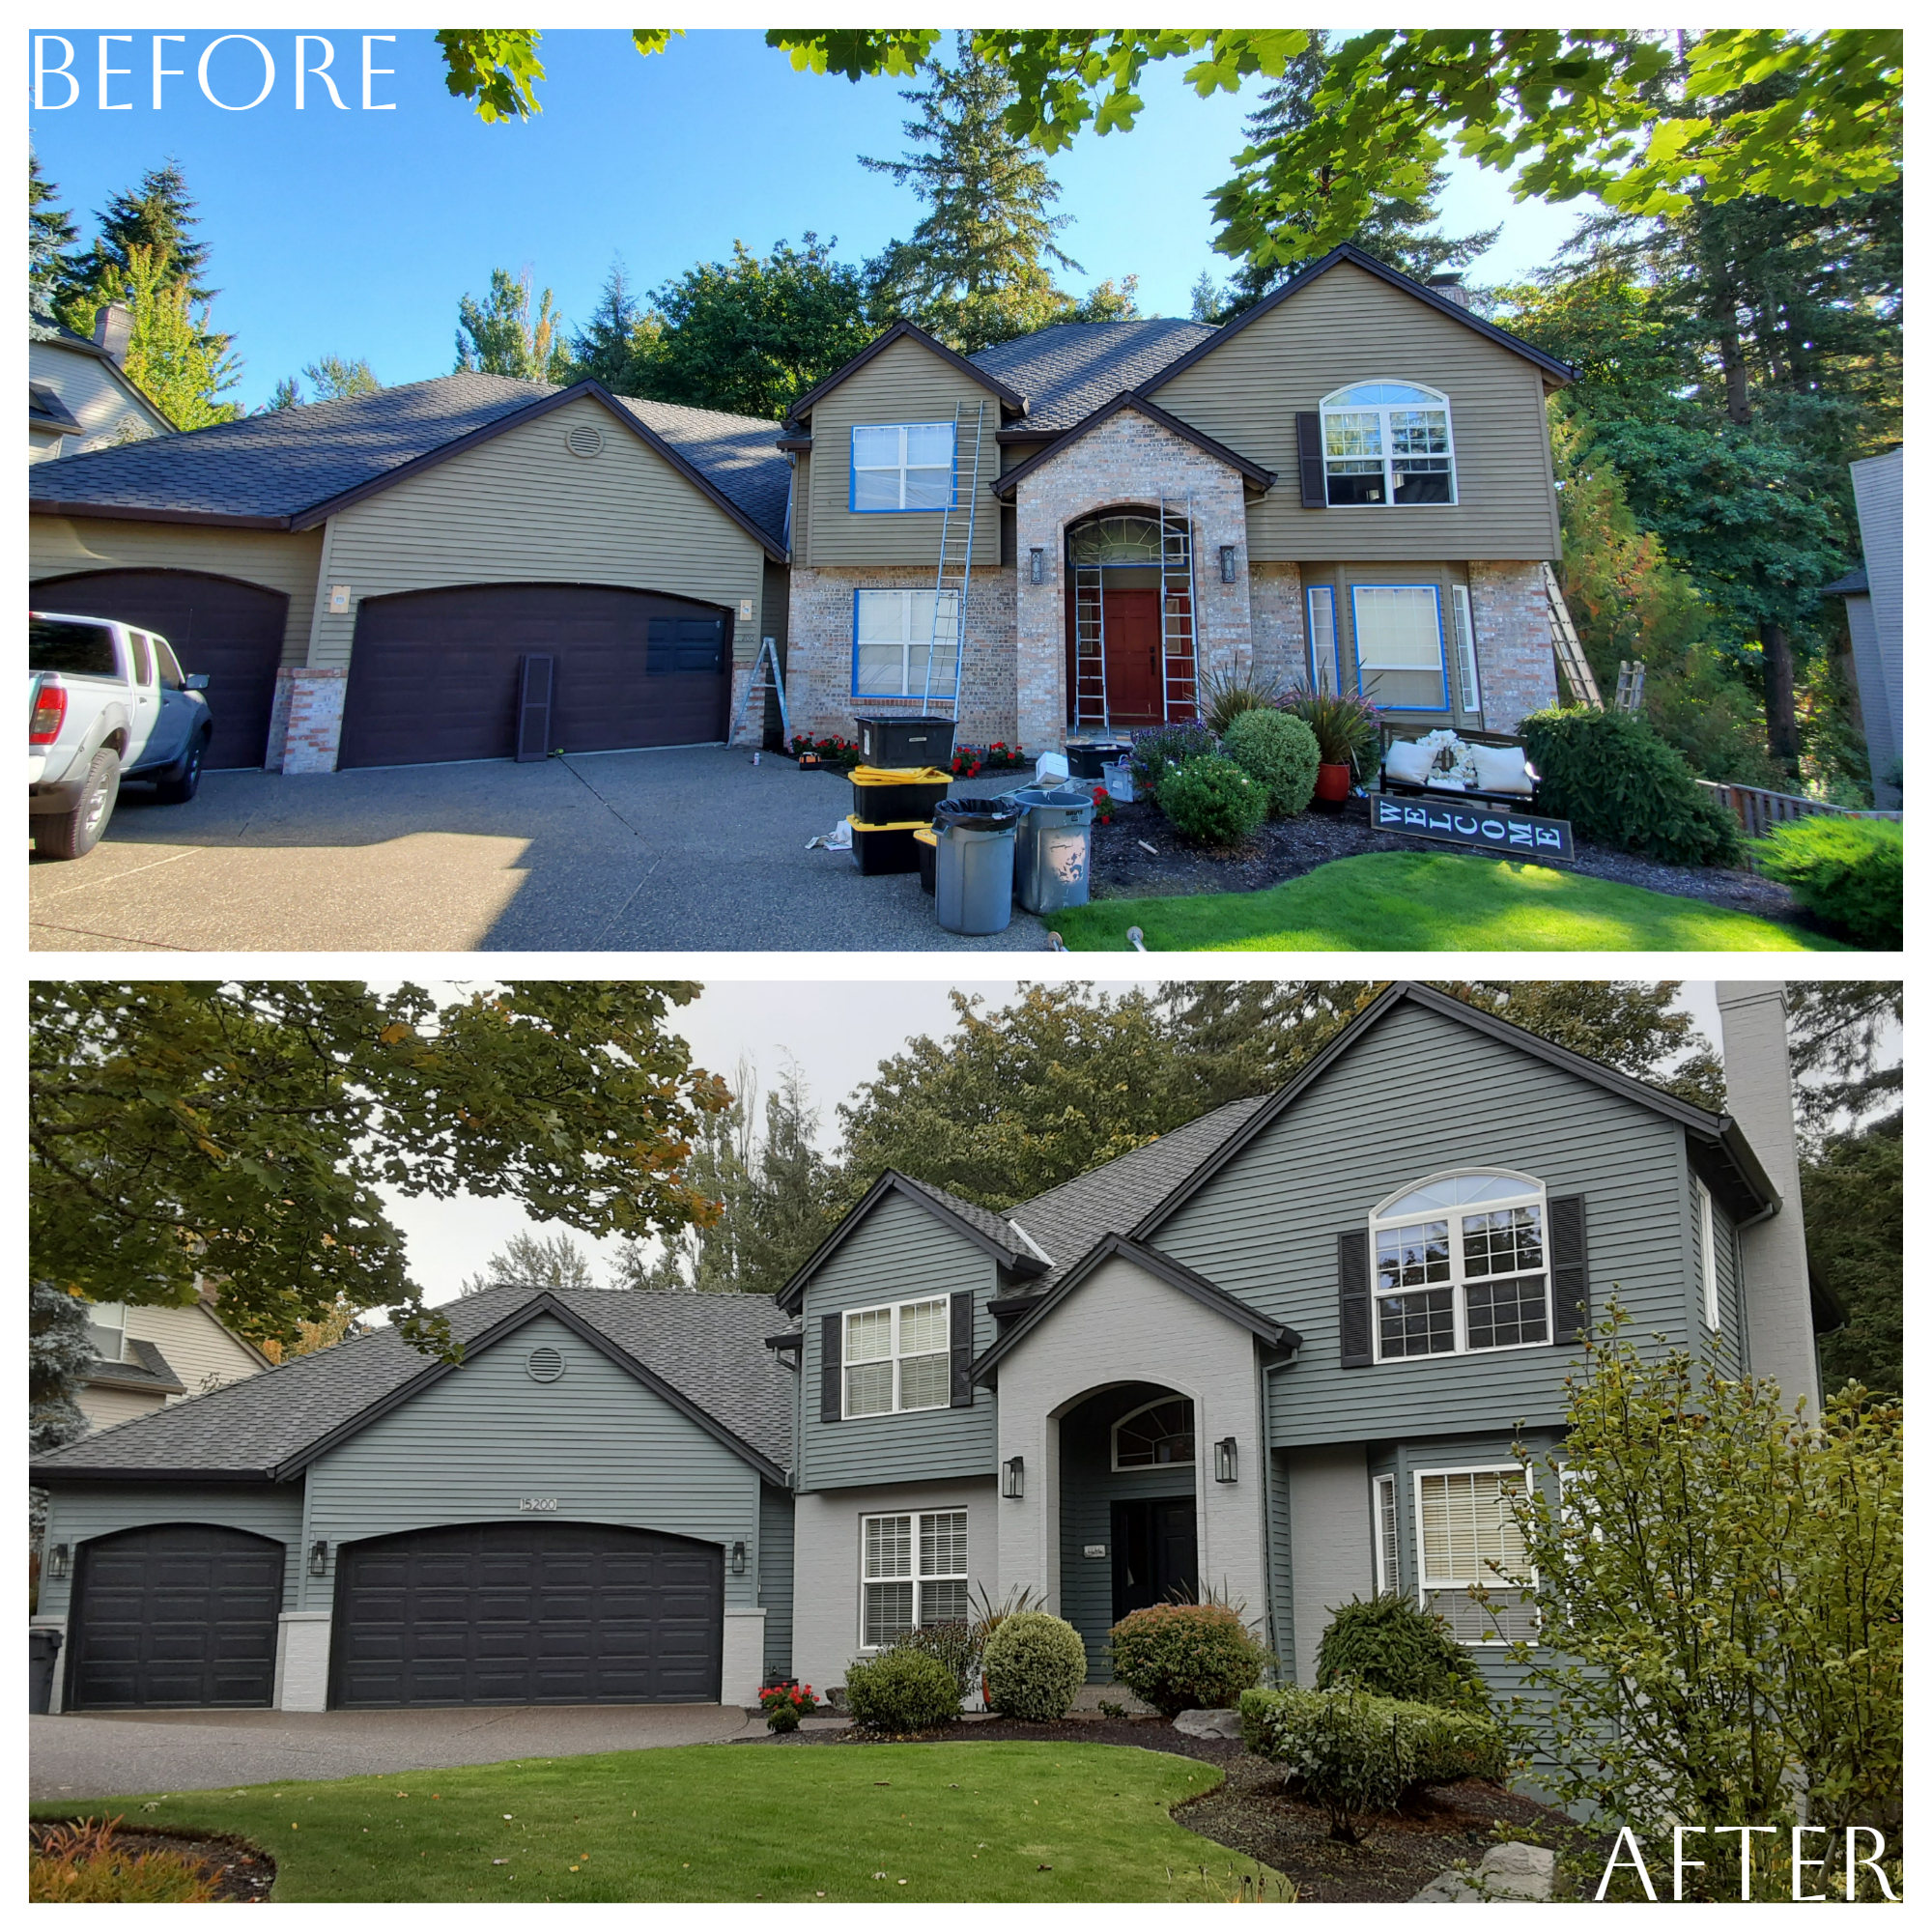 Before and after pictures of a house with spot gray siding.